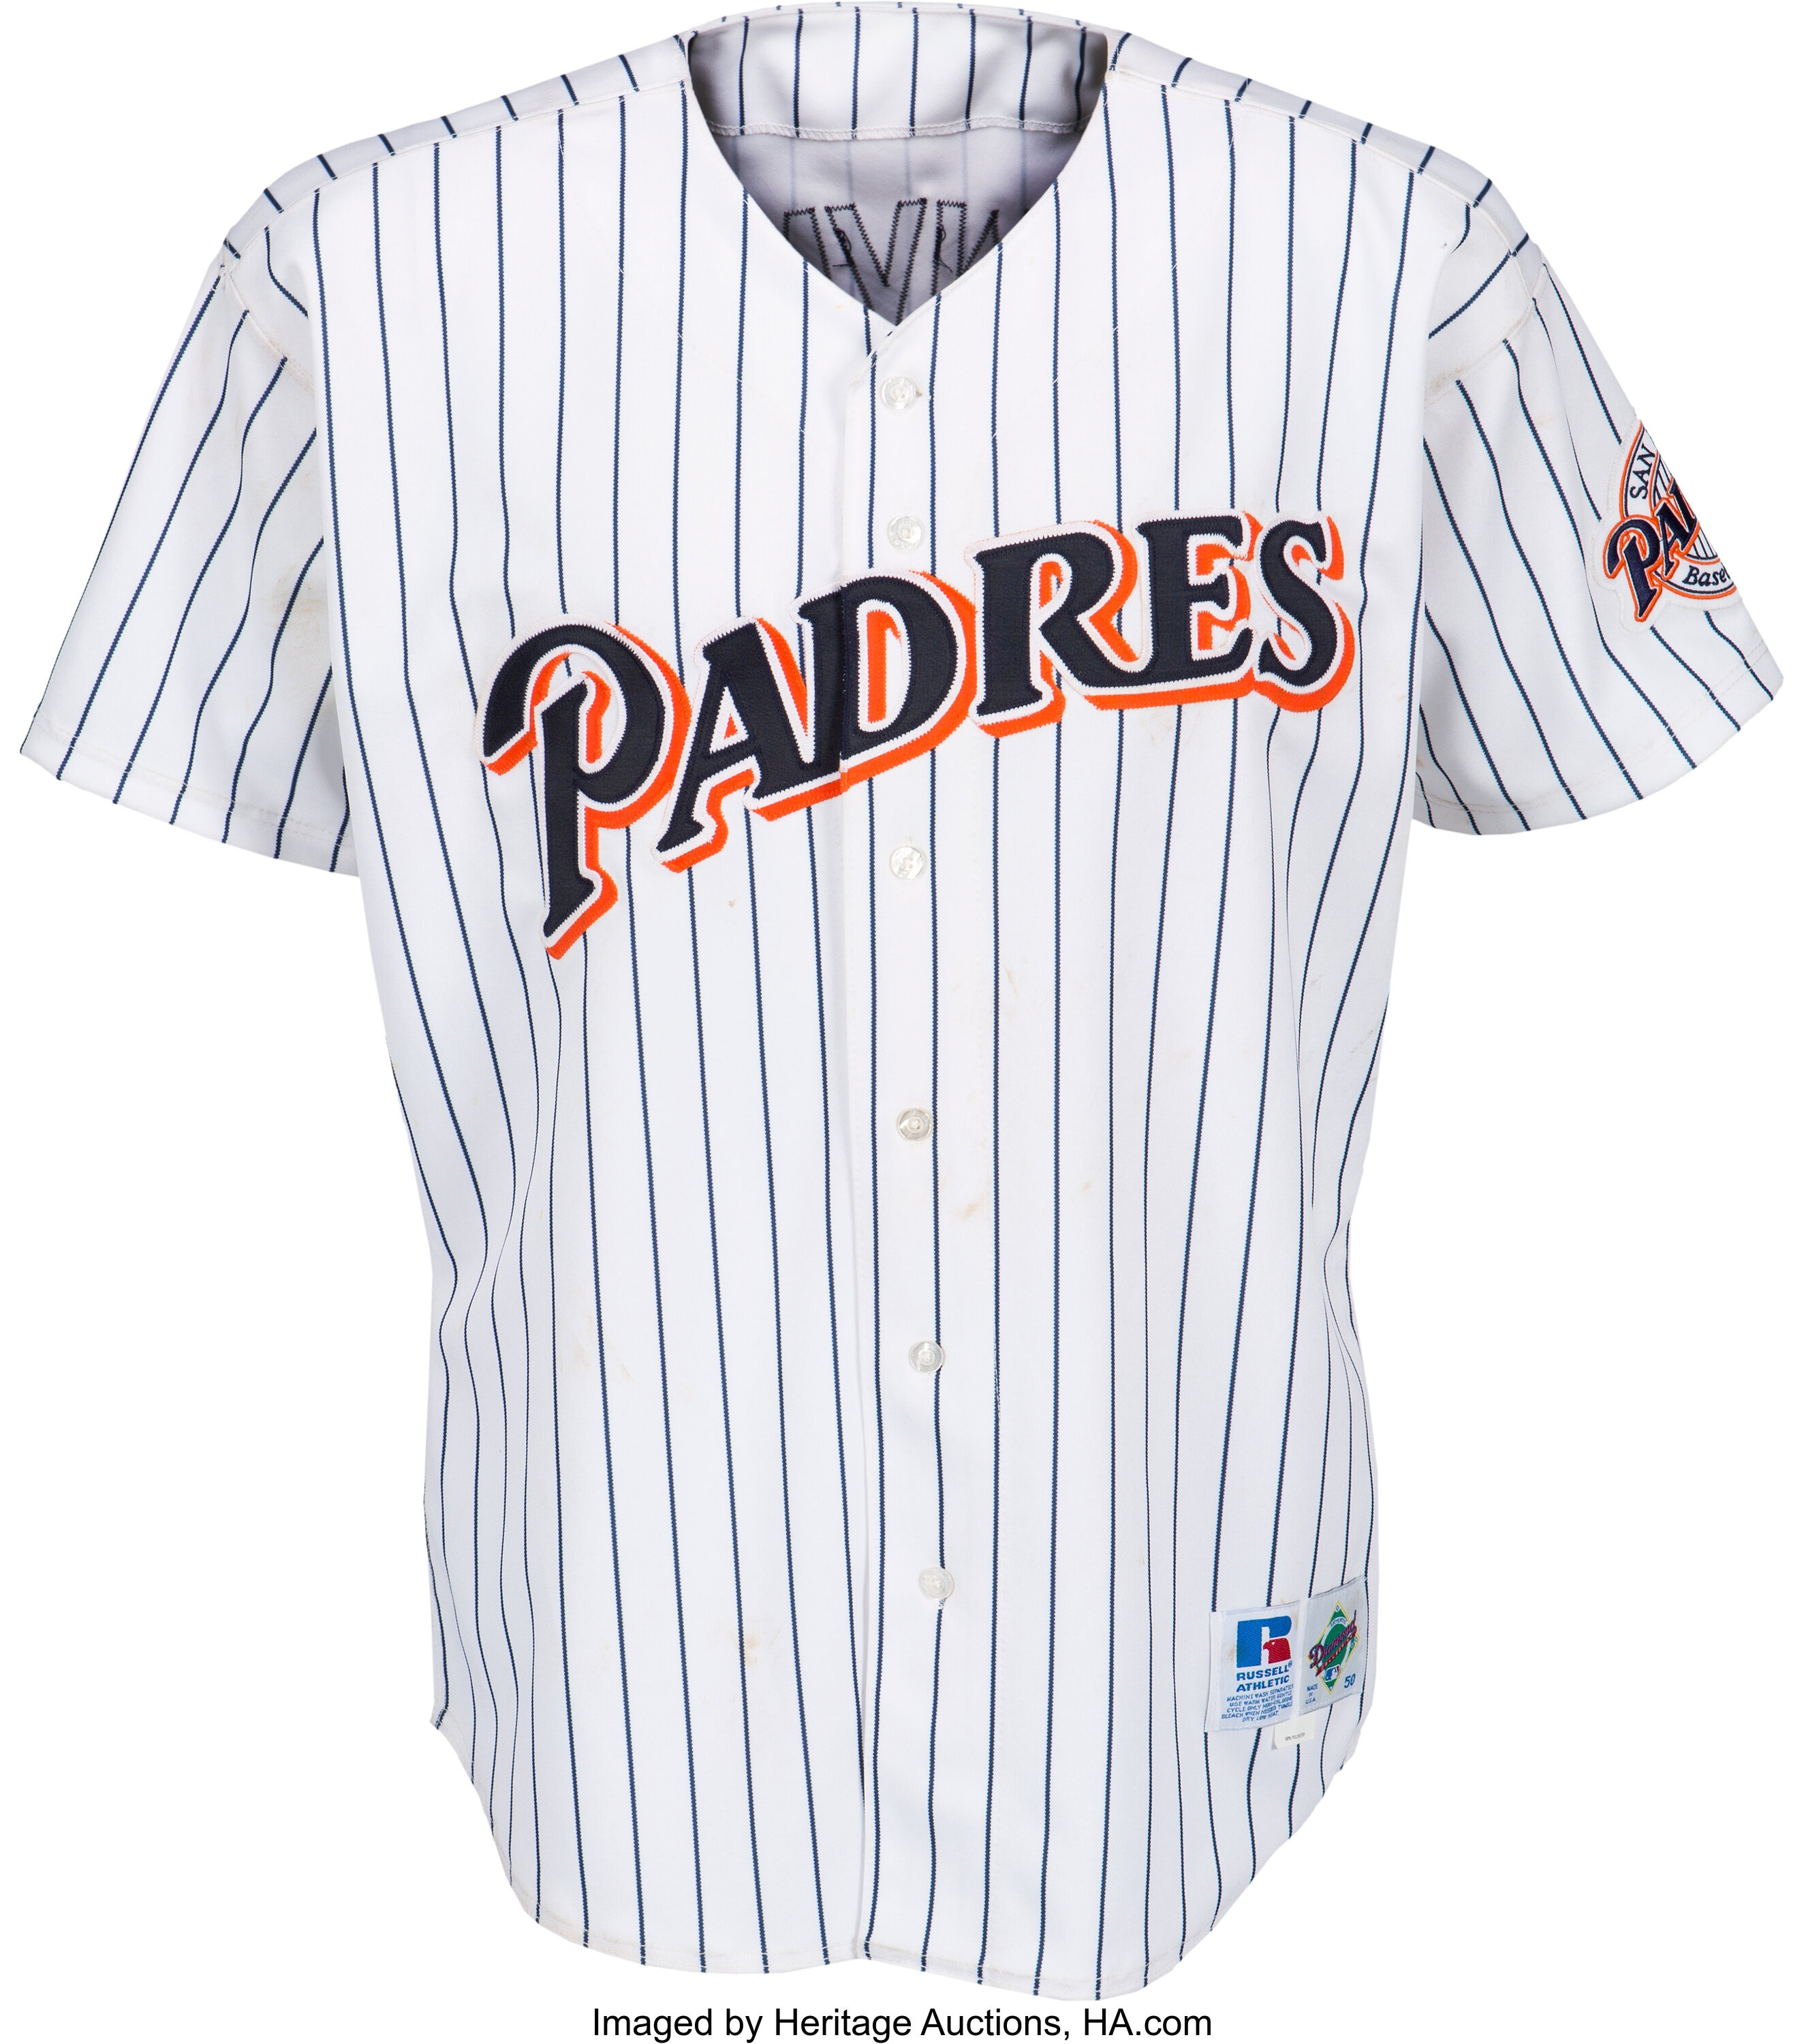 Pics: San Diego Padres in 1990s Throwback Uniforms – SportsLogos